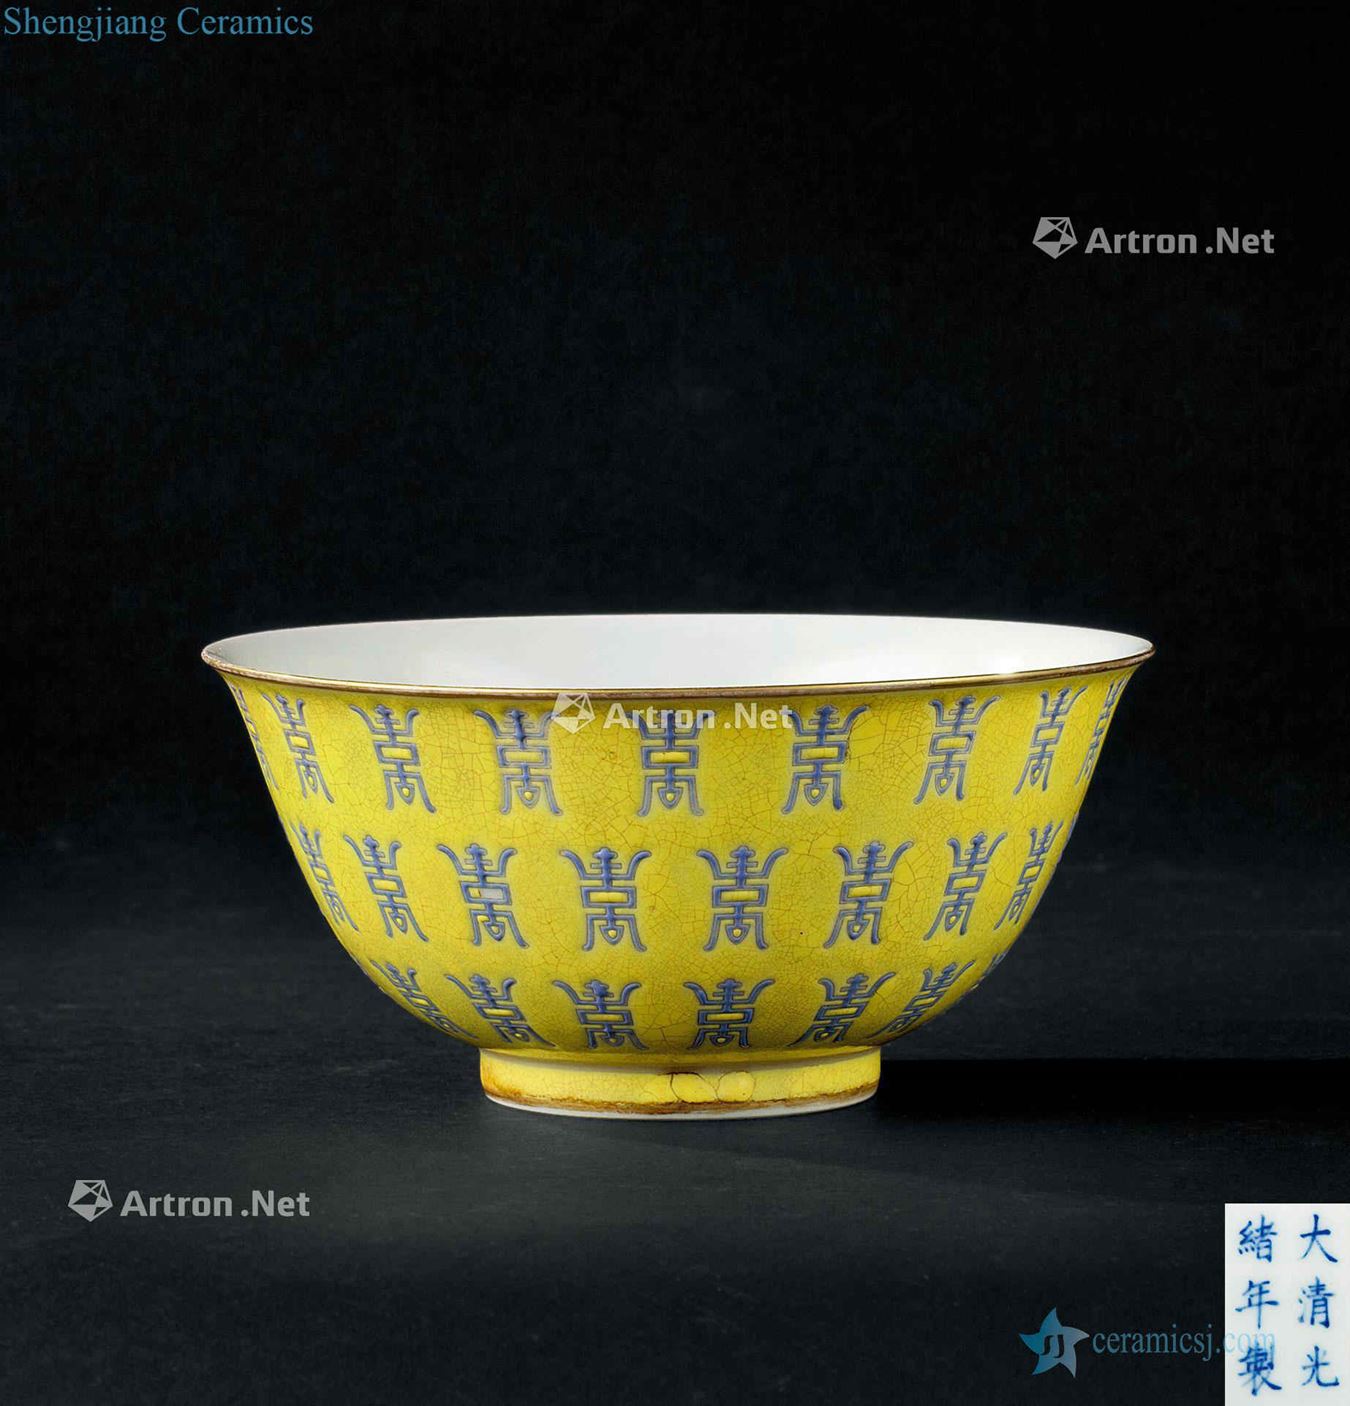 In the qing dynasty (1644-1911), long-lived green-splashed bowls to pastel yellow